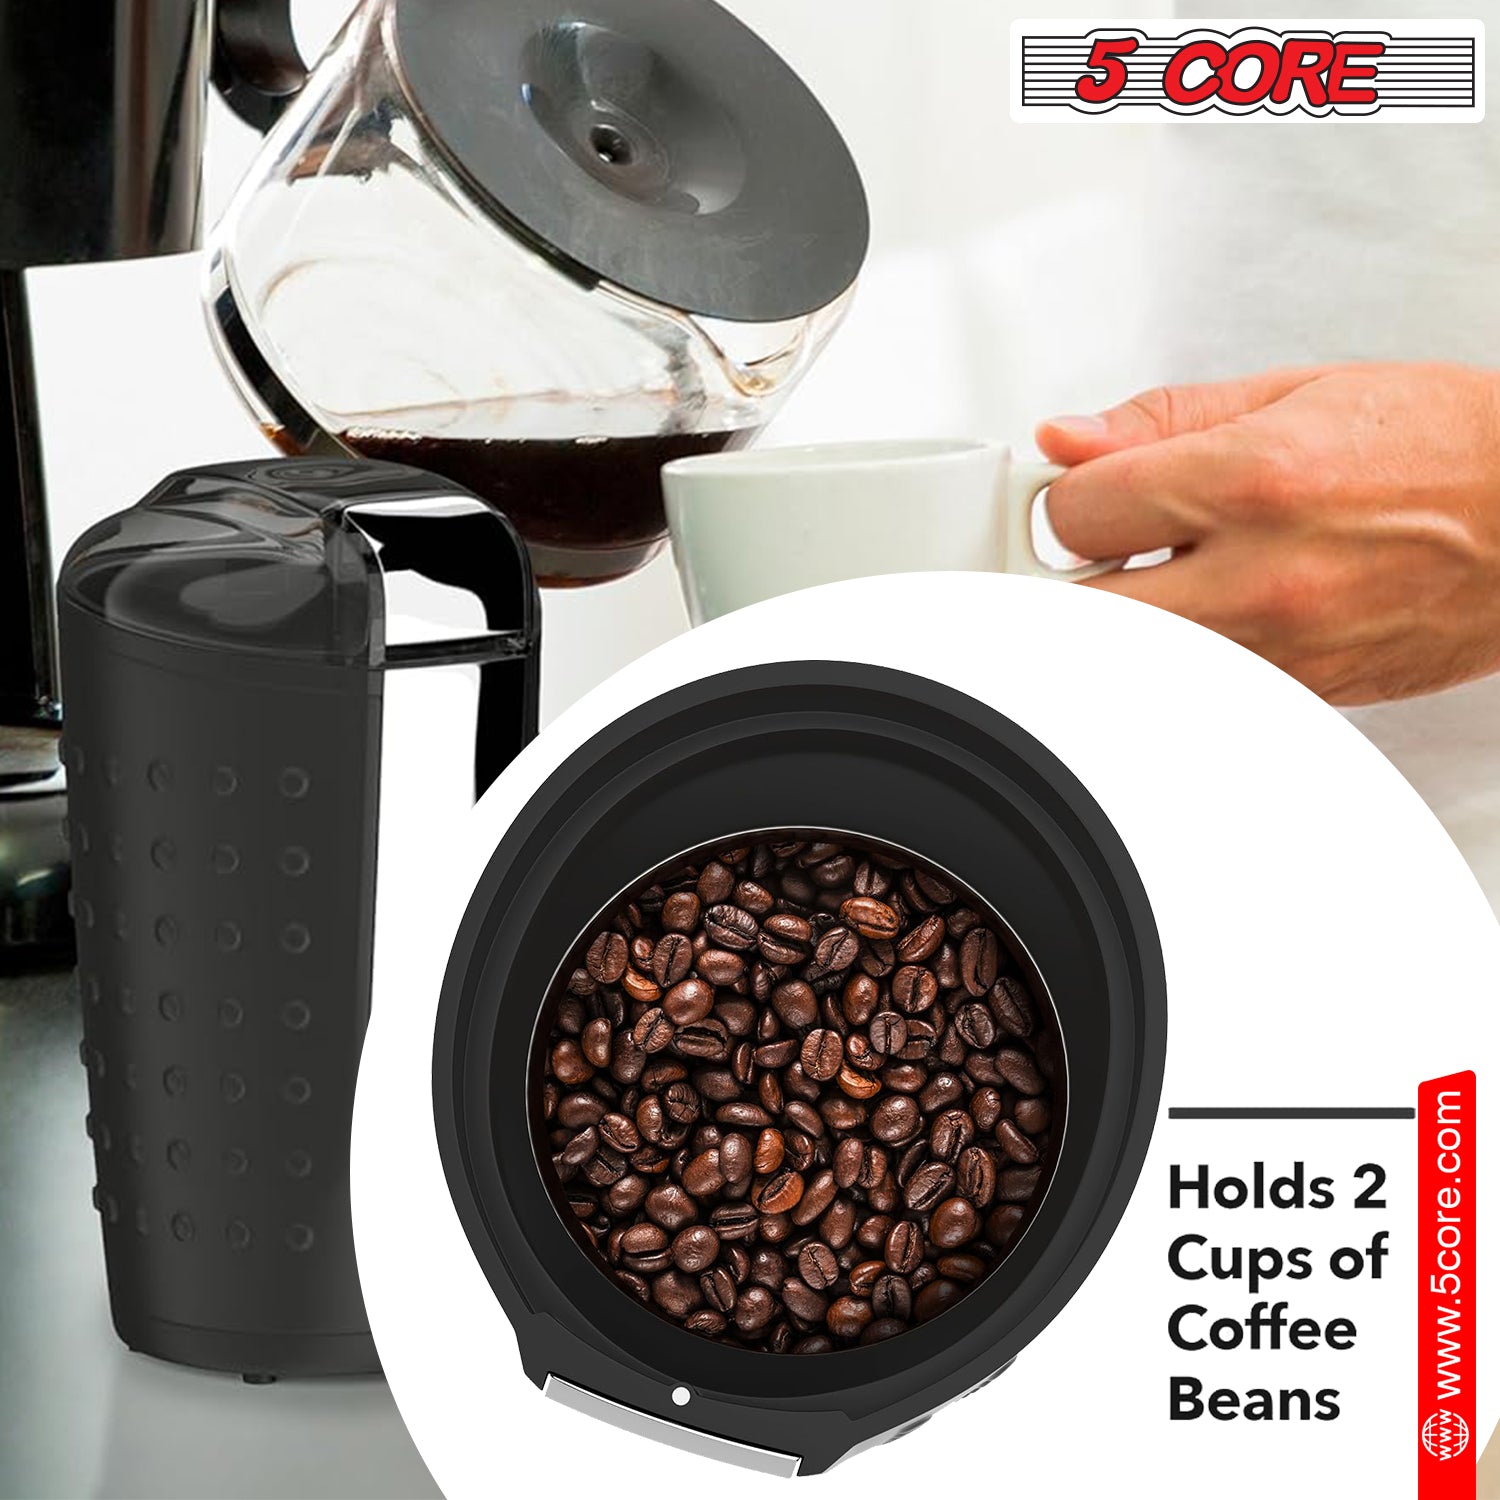 Transform whole beans into aromatic coffee grounds with the CG 01 BL grinder.